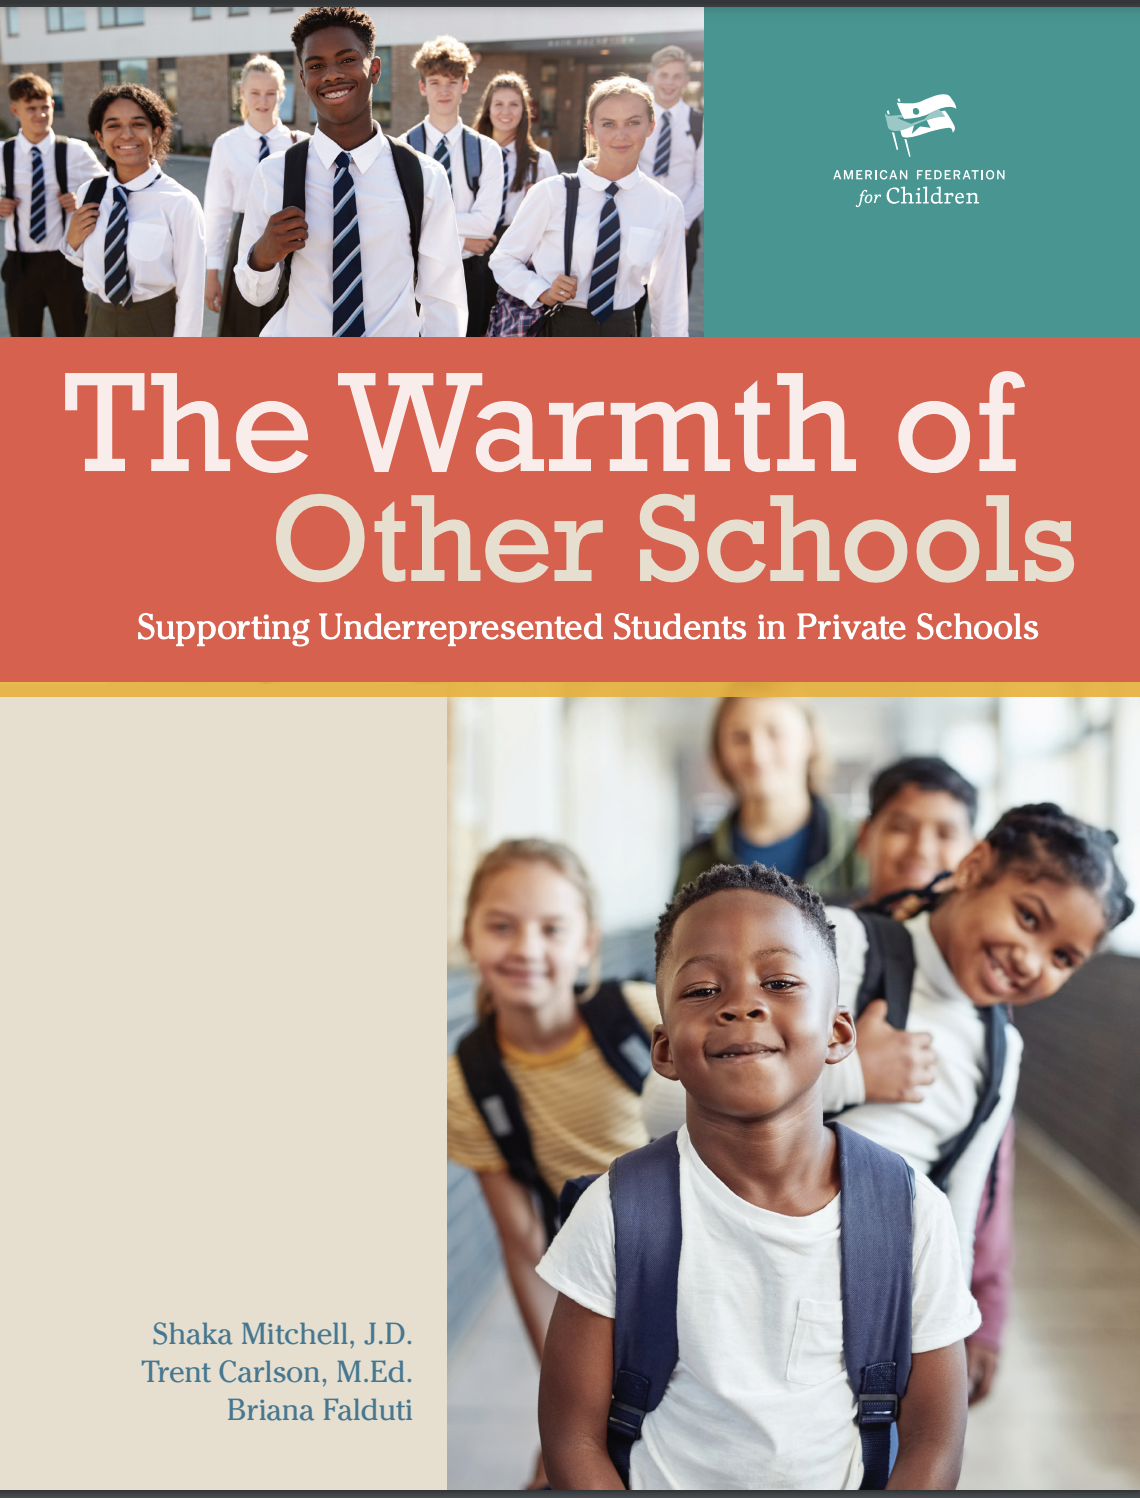 Learn How to Serve Minority Students Better at Your Private School